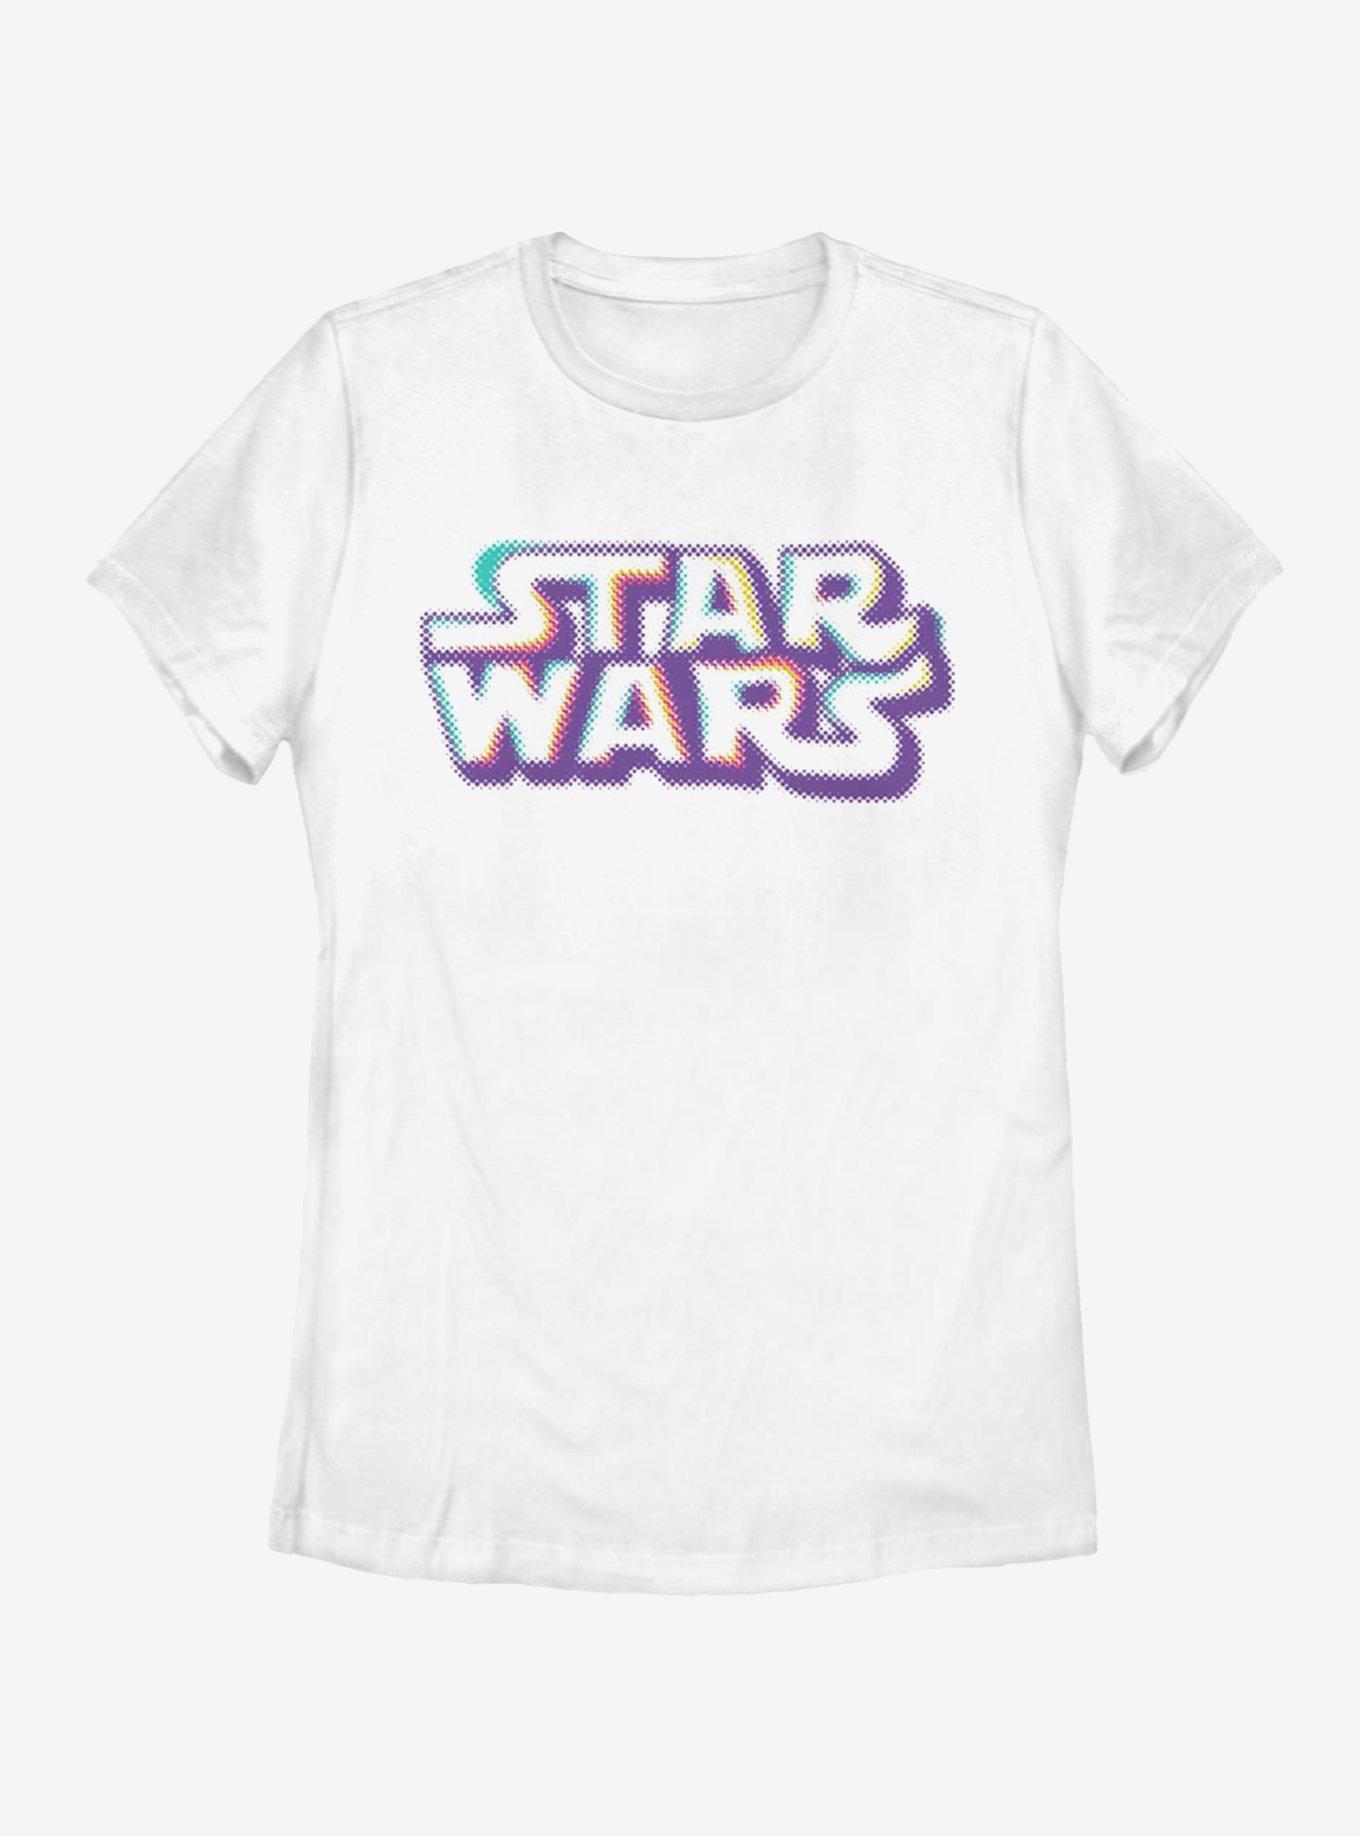 Star Wars Thermal Dotted Logo Womens T-Shirt, WHITE, hi-res